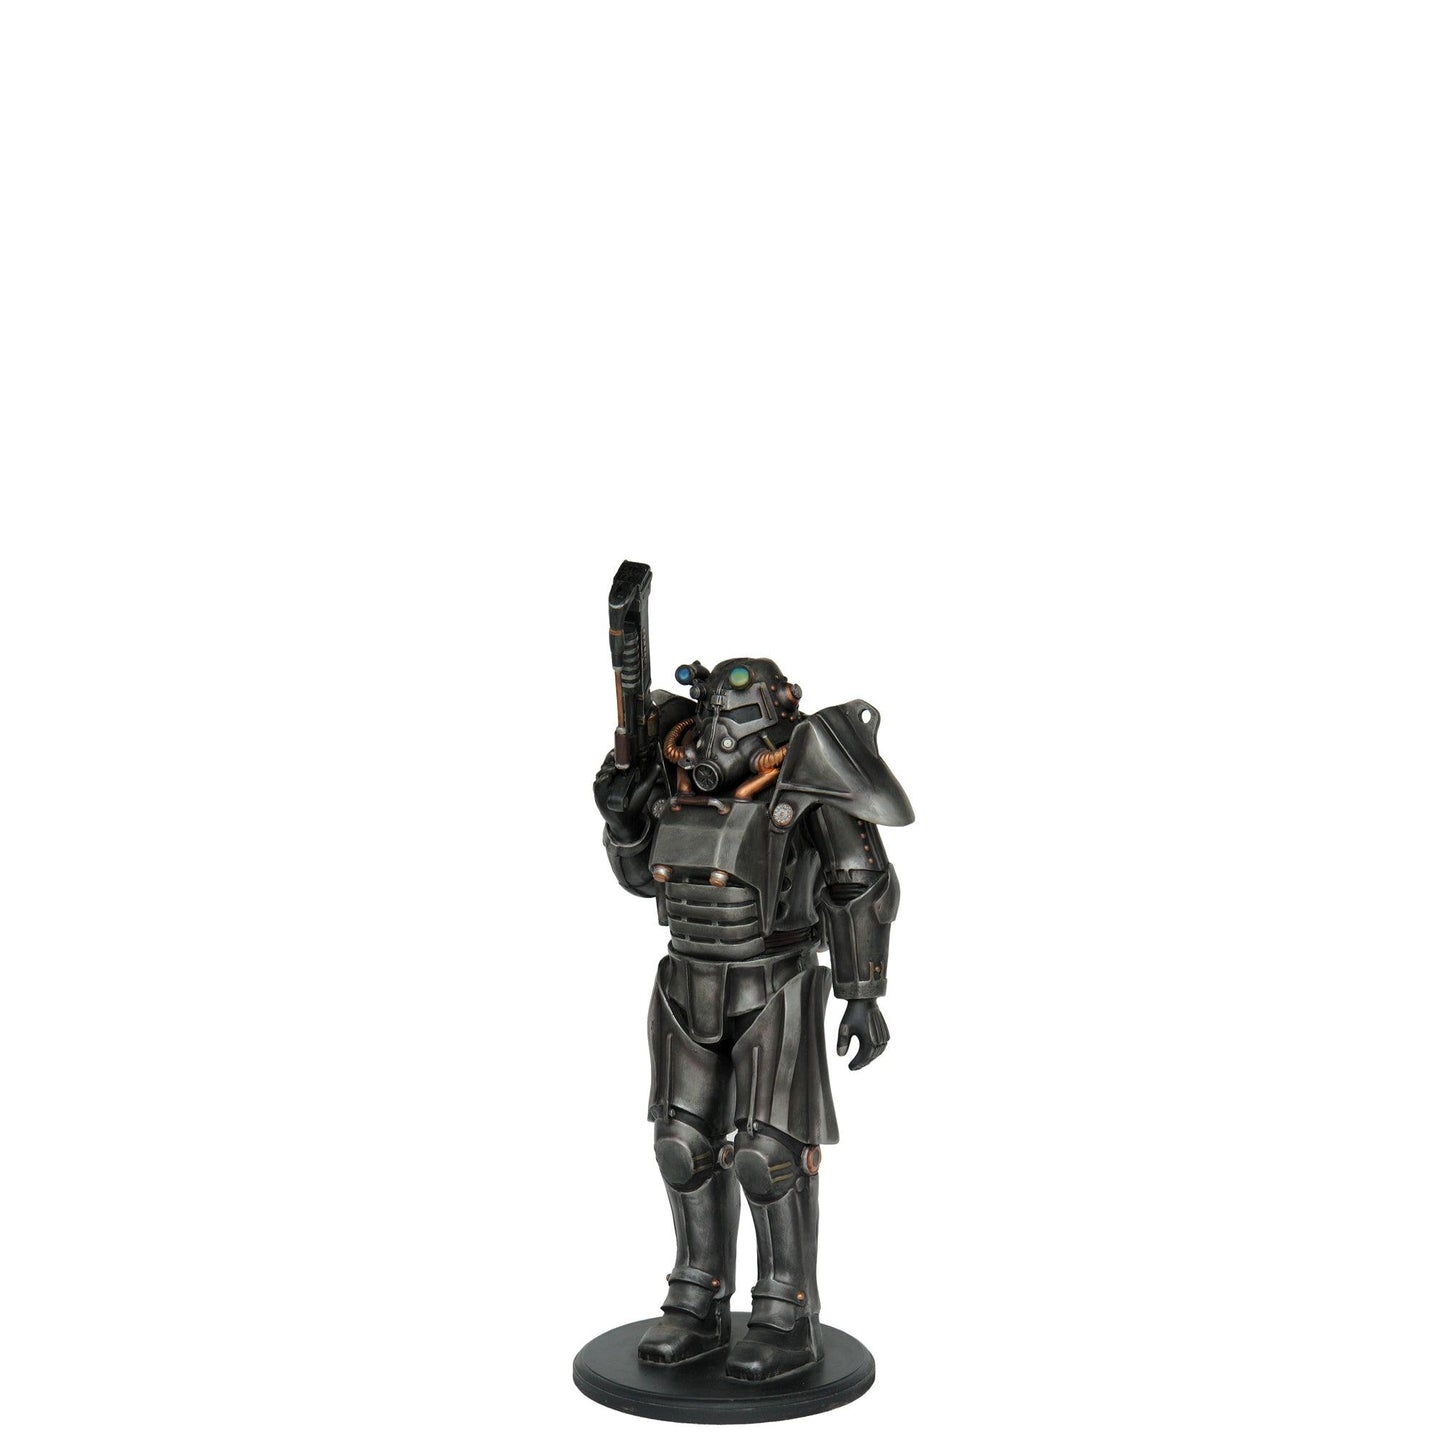 Small Galactic Robot Statue